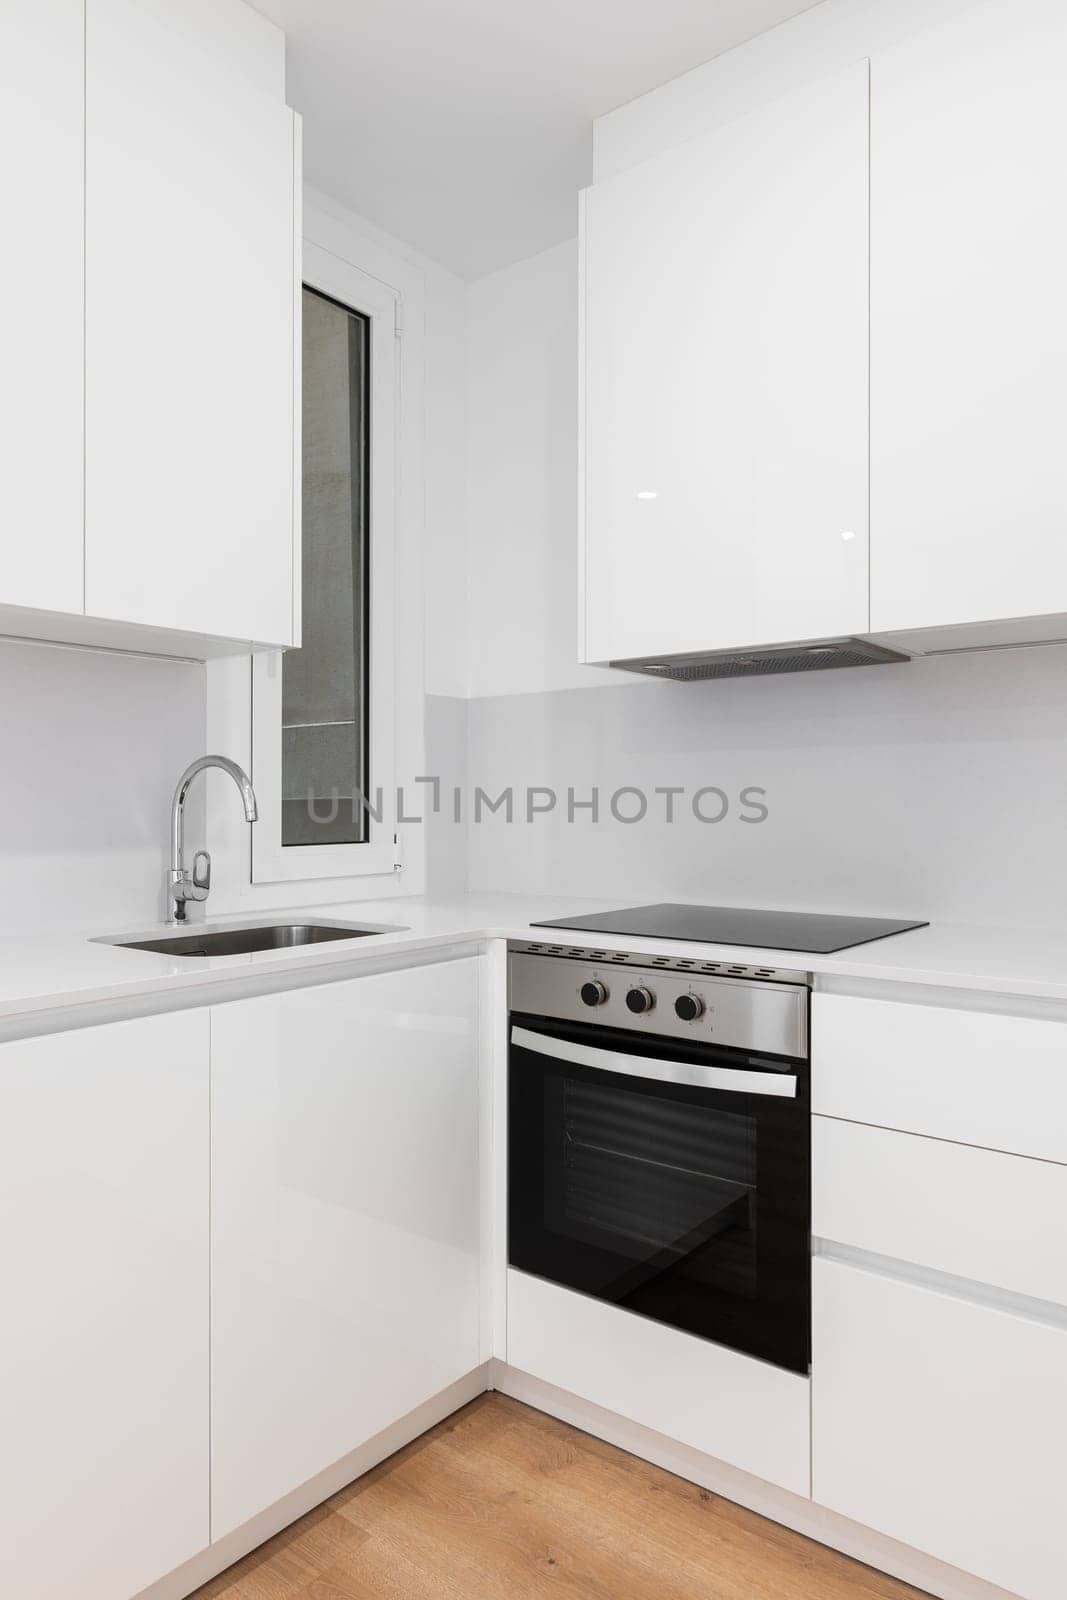 Modern white kitchen with sleek cabinets and a stylish black stove top oven by apavlin